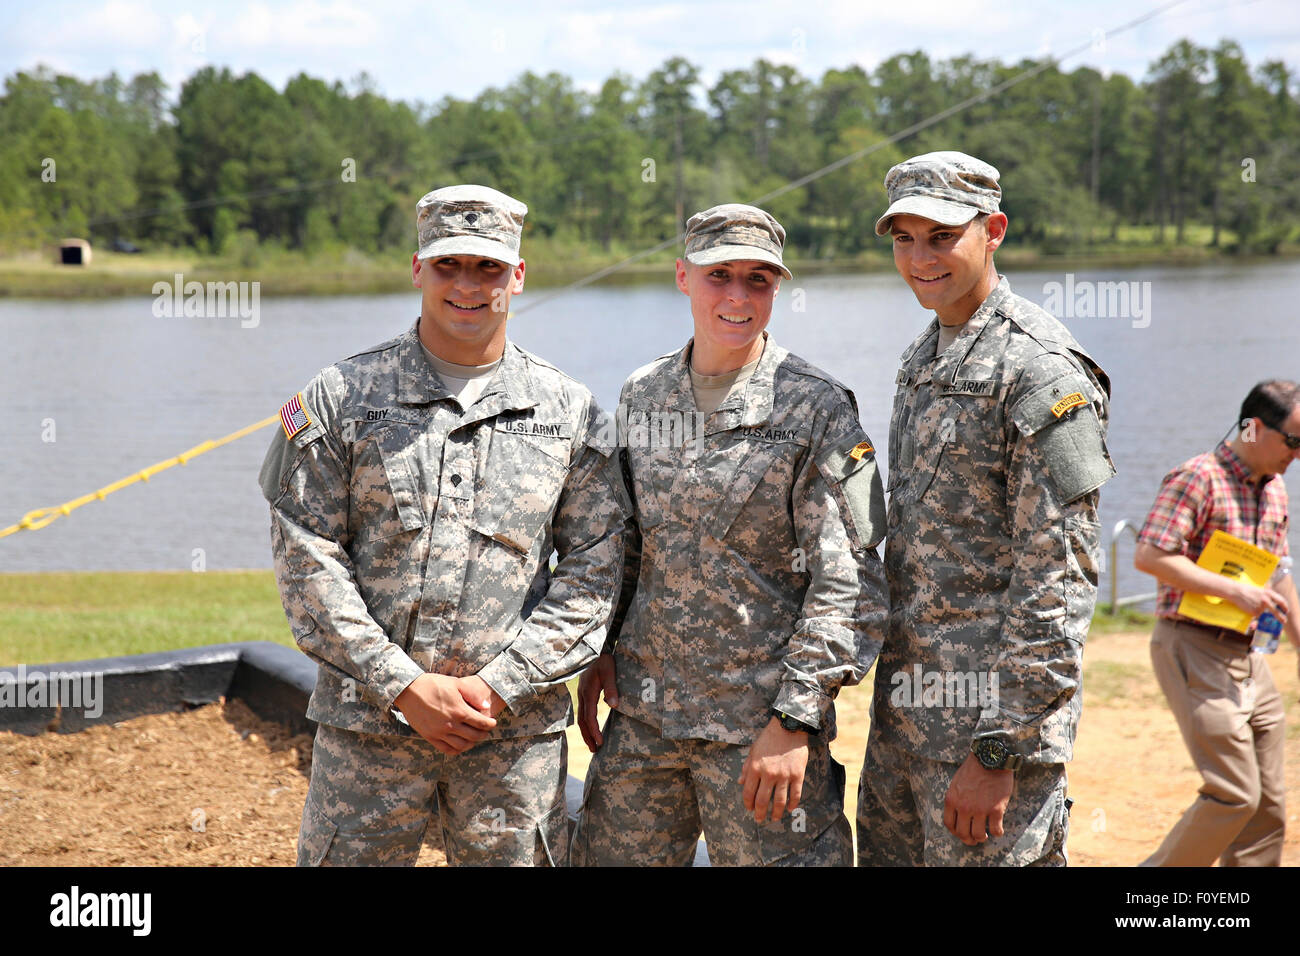 U.S. Army 1st Lt. Shaye Haver poses with fellow soldiers after graduation ceremonies at the Army Ranger school August 21, 2015 at Fort Benning, Georgia. Haver and fellow soldier Captain Kristen Griest became the first women to graduate from the 61-day-long Ranger course considered one of the most intense and demanding in the military. Stock Photo